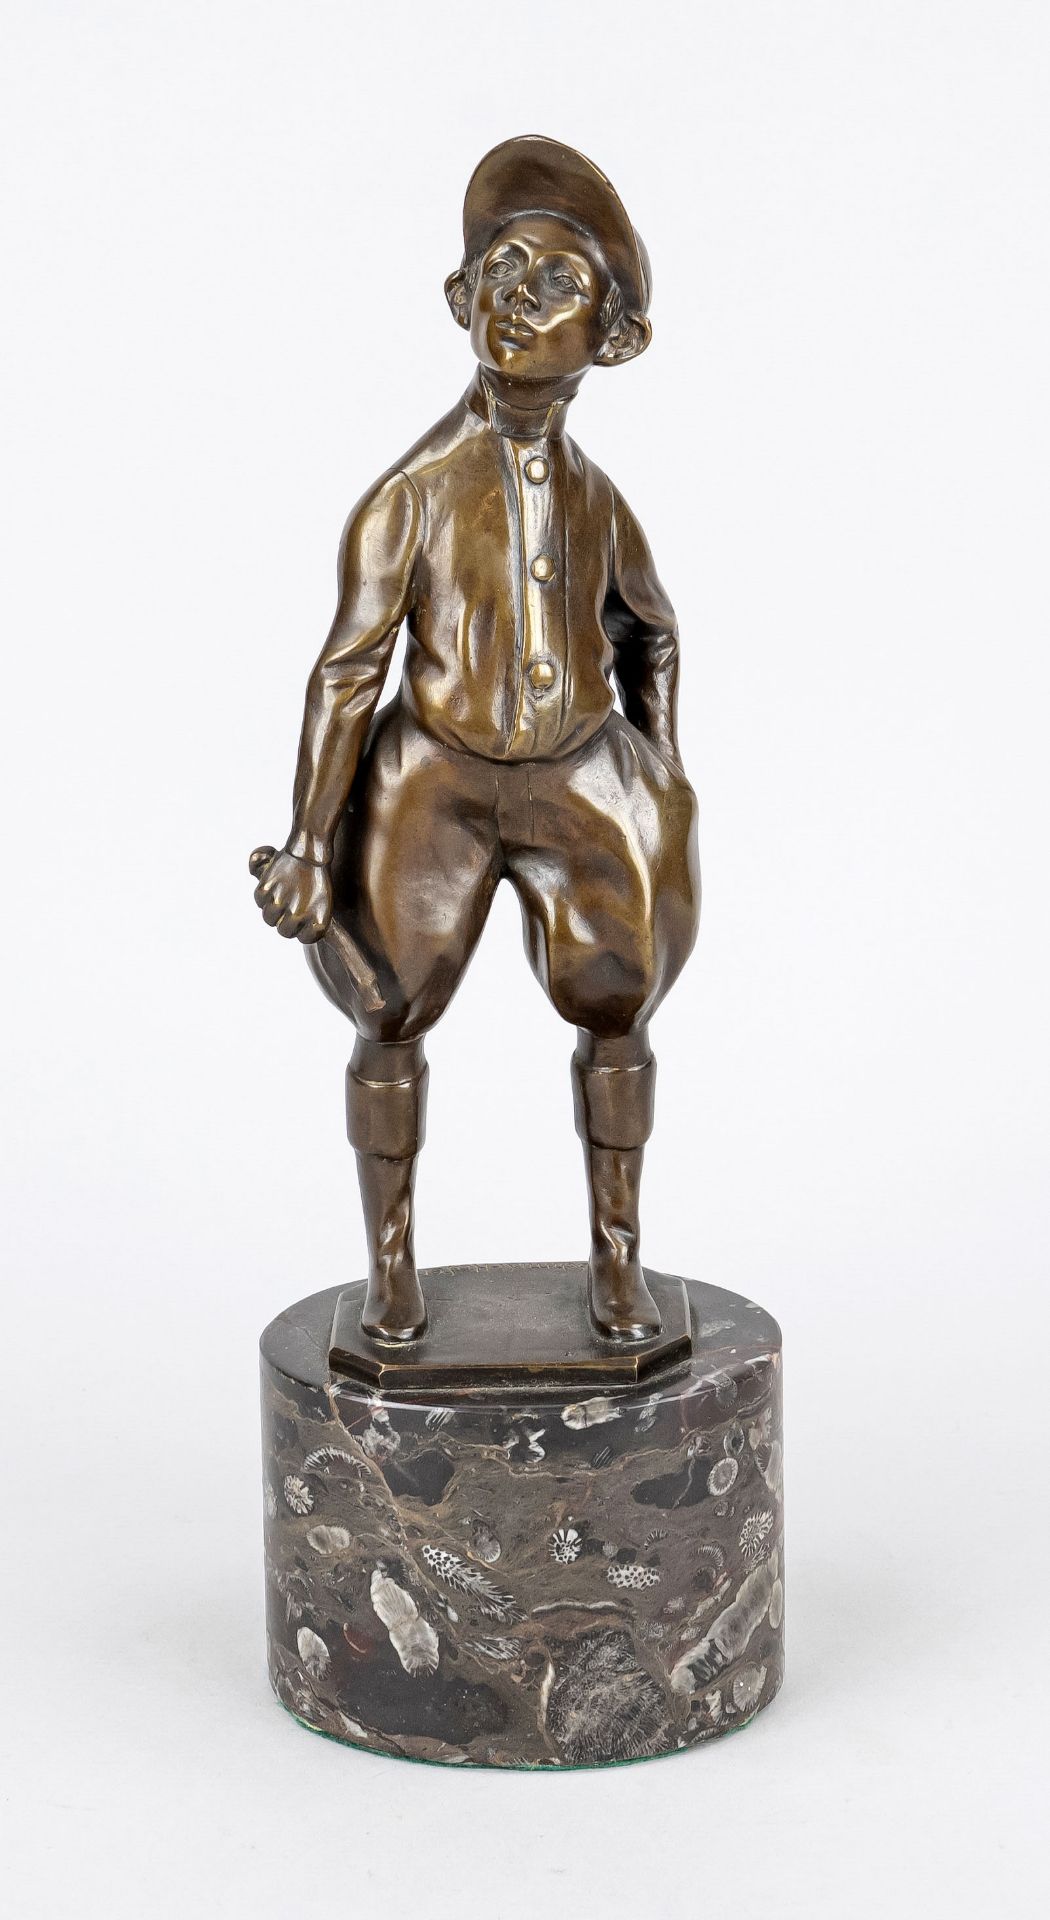 Otto Schmidt-Hofer (1873-1925), young jockey, greenish patinated bronze on marble base, signed in